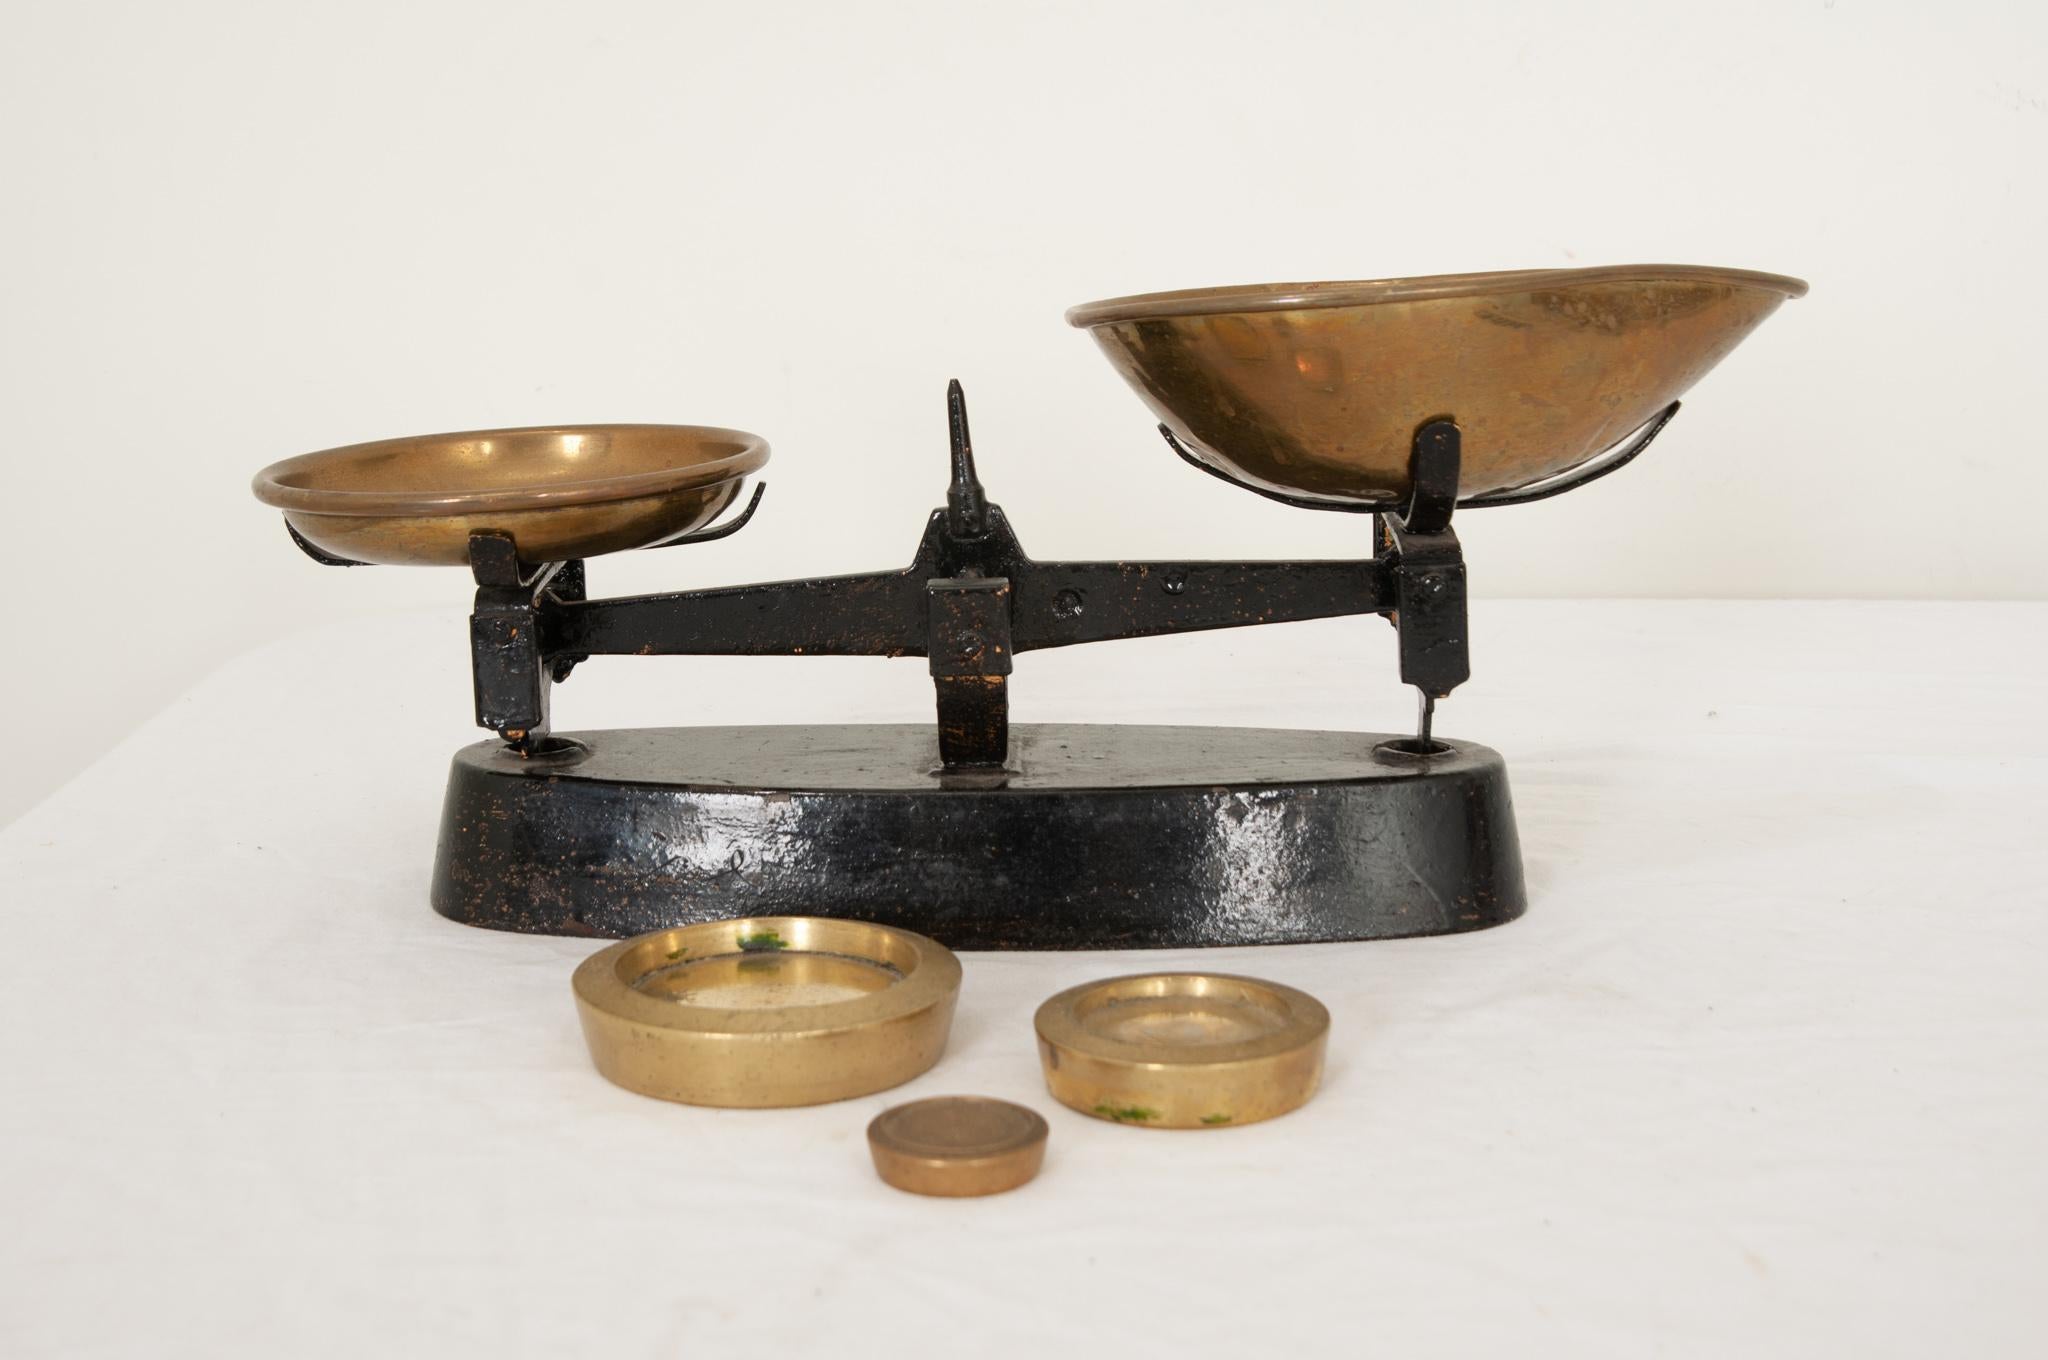 An antique British counter or grocer scale in cast iron and brass circa 1890. Small scales of this type had many uses during the Victorian Era and could be found in apothecaries, tobacconists, grocers, and shops. This scale has a painted black cast